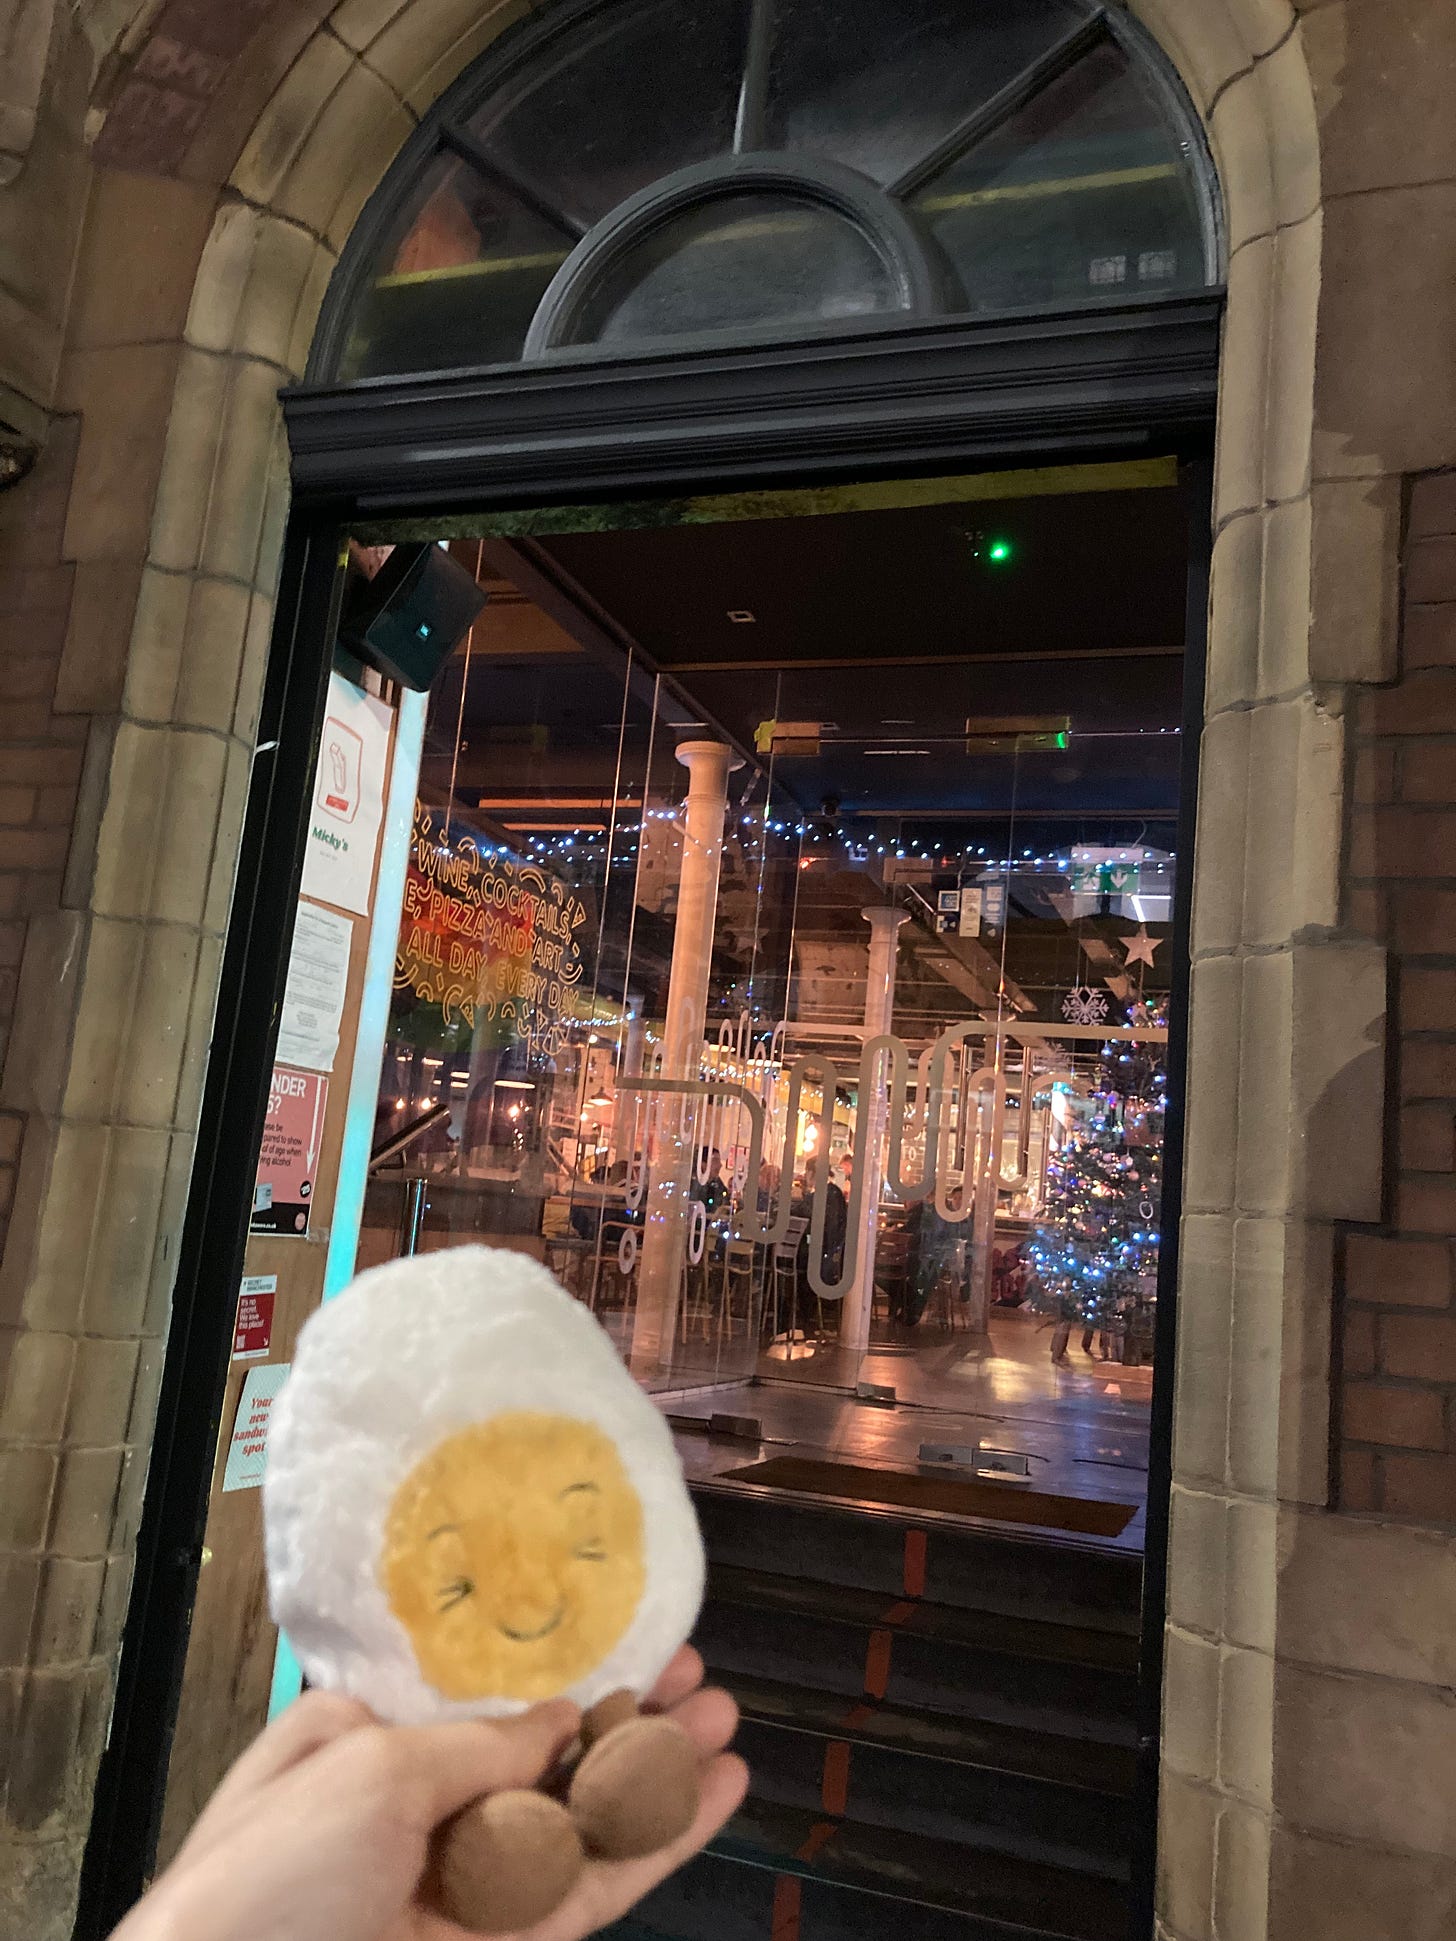 Photograph of dippy the soft toy egg outside of a pizza place with a stonework arch glass doorway showing a christmas tree and lights inside. 